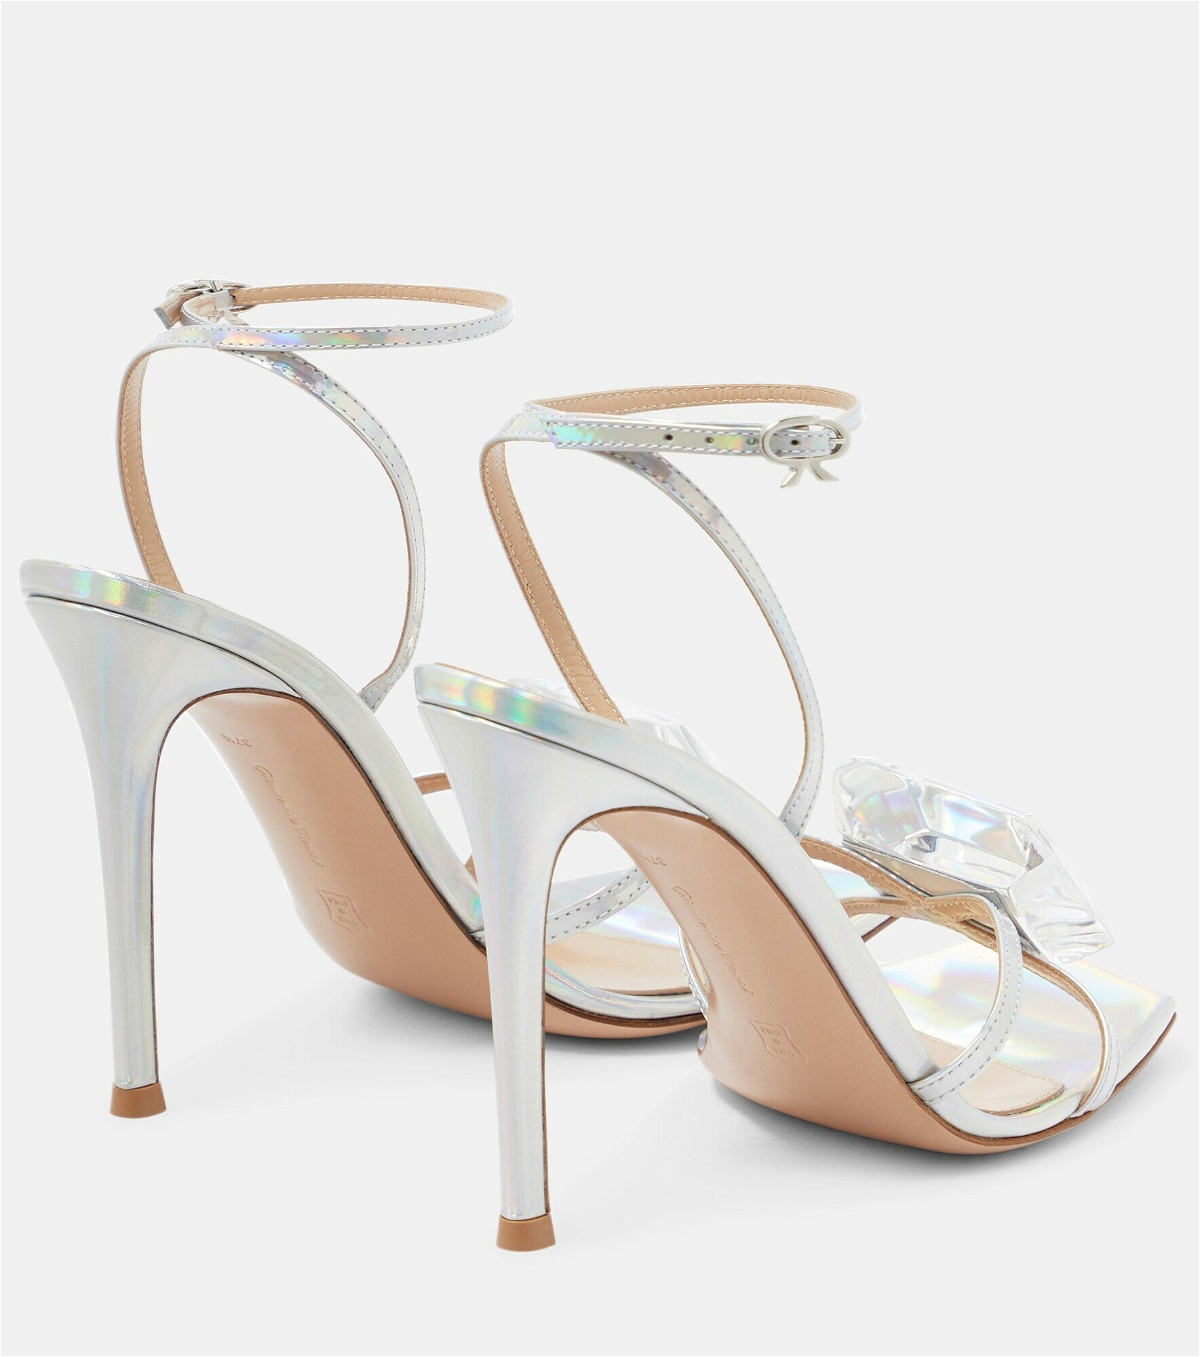 Gianvito Rossi - Jaipur 115 embellished leather sandals Gianvito Rossi